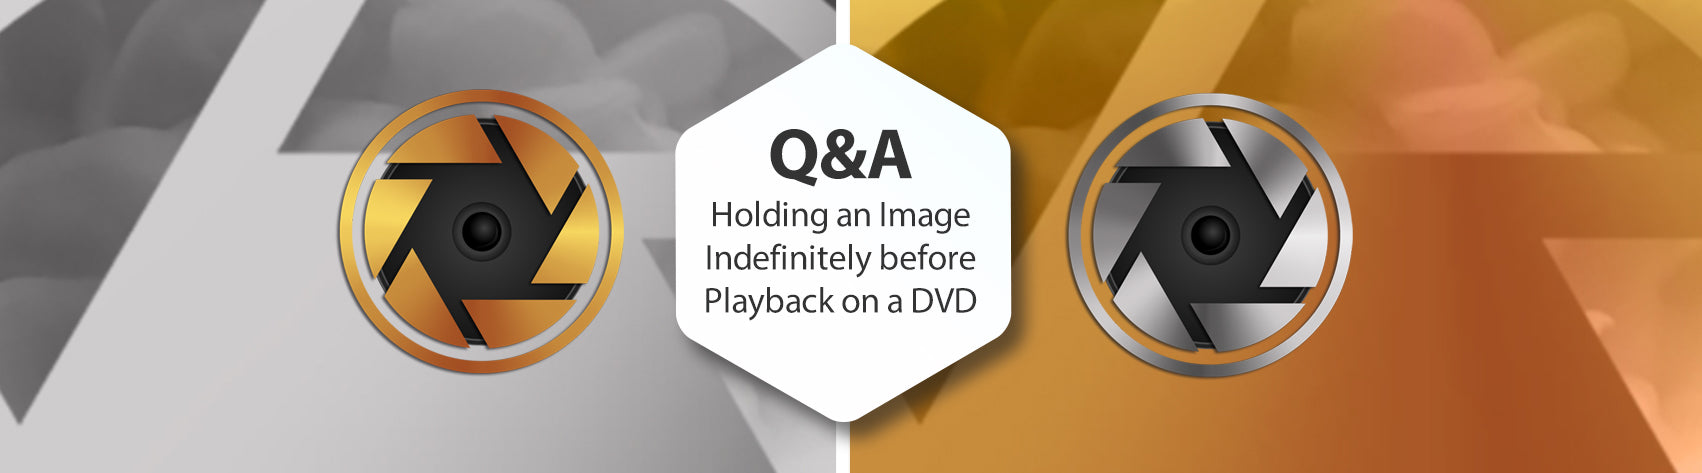 Q&A - How to Indefinitely Hold an Image before Playback on a DVD